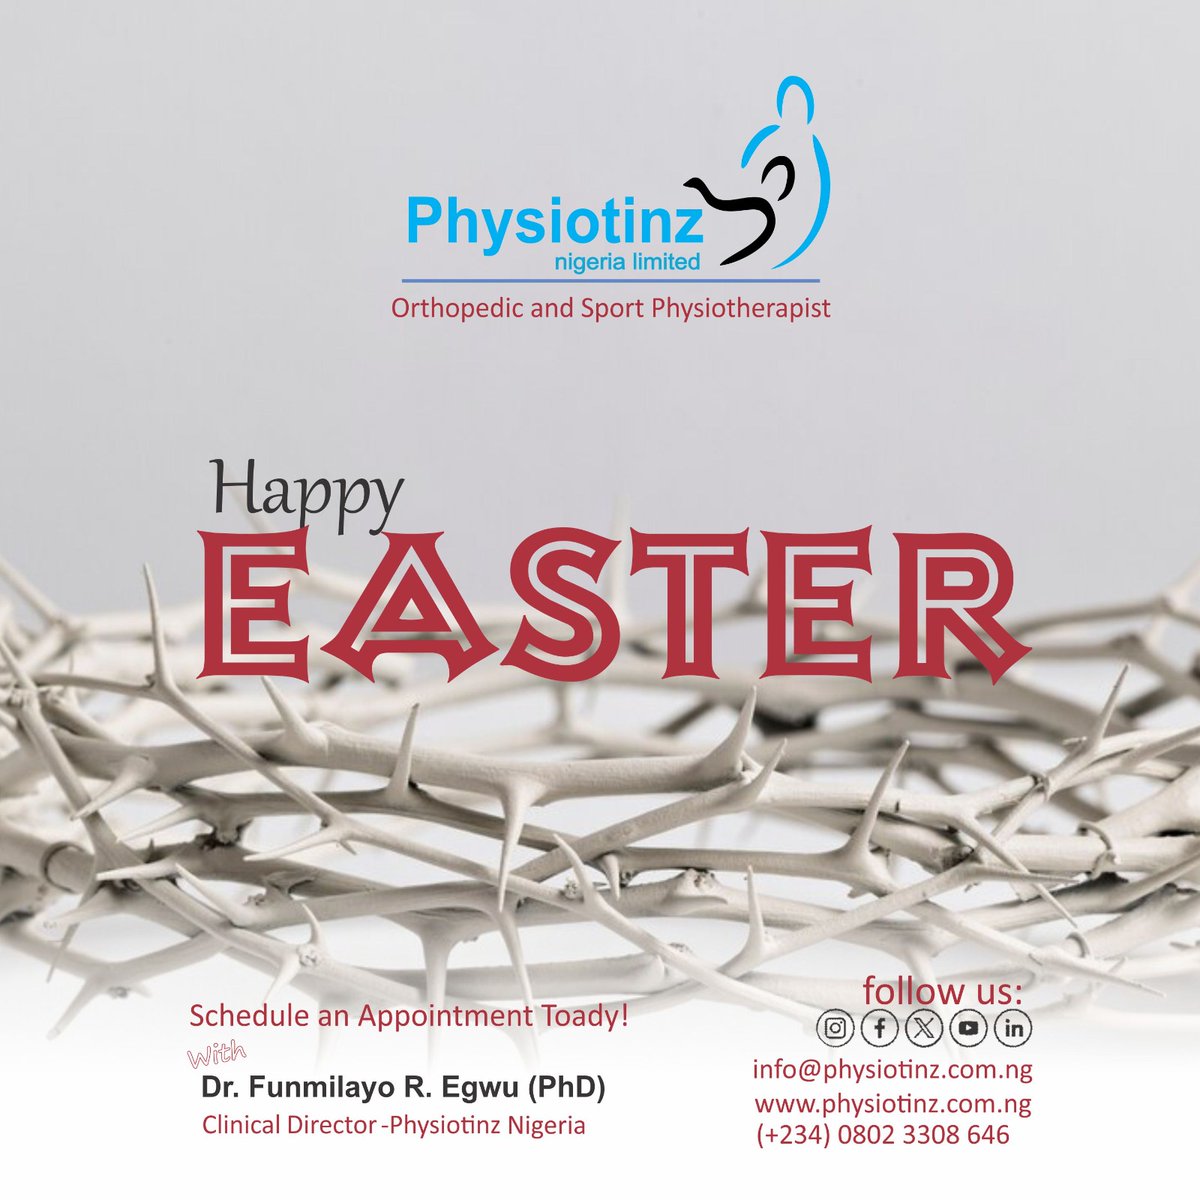 It’s such a hopeful time of year, and we wish you every good thing at Easter and always.
Happy Easter Celebration...

.
.
.
.
.
.
.
#physiotinz #therapy #celebrate #easter #wecare #healthiswealth #march2024 #stayhappy #fitness #staypositive #stayhealthyandfit